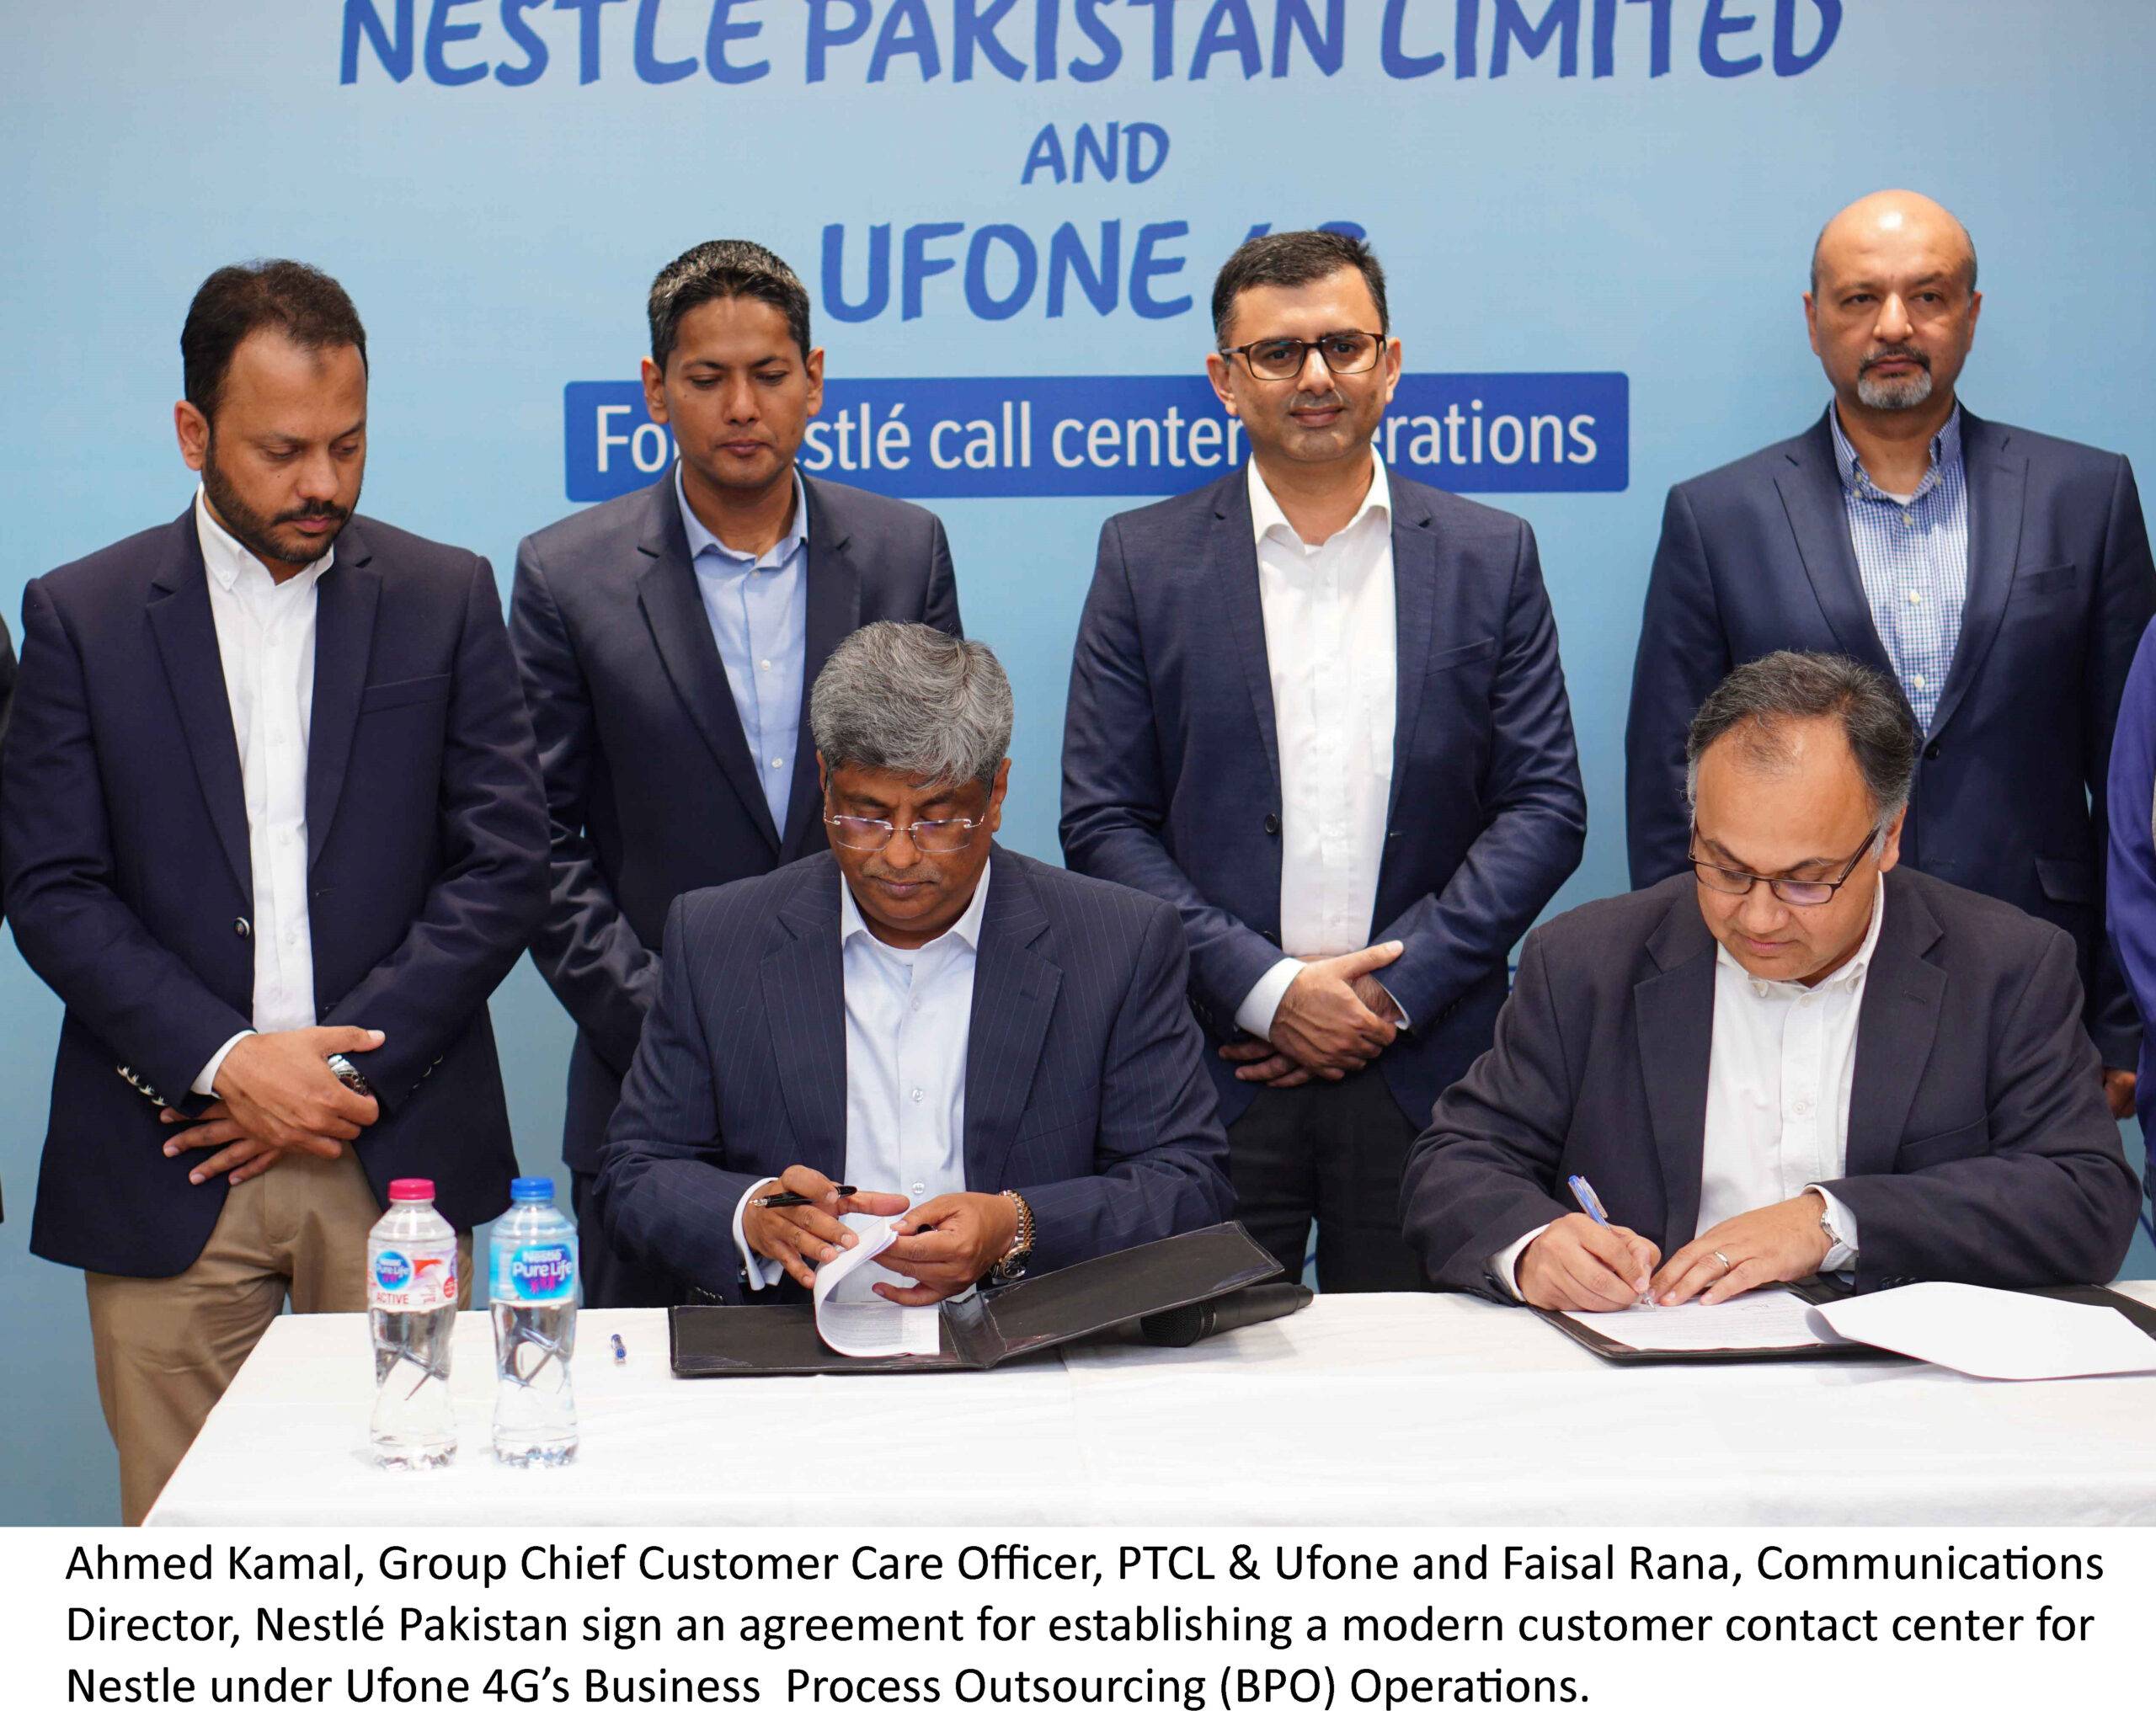 Nestlé Pakistan Limited collaborates with Ufone 4G BPO Operations to establish advanced customer service solution